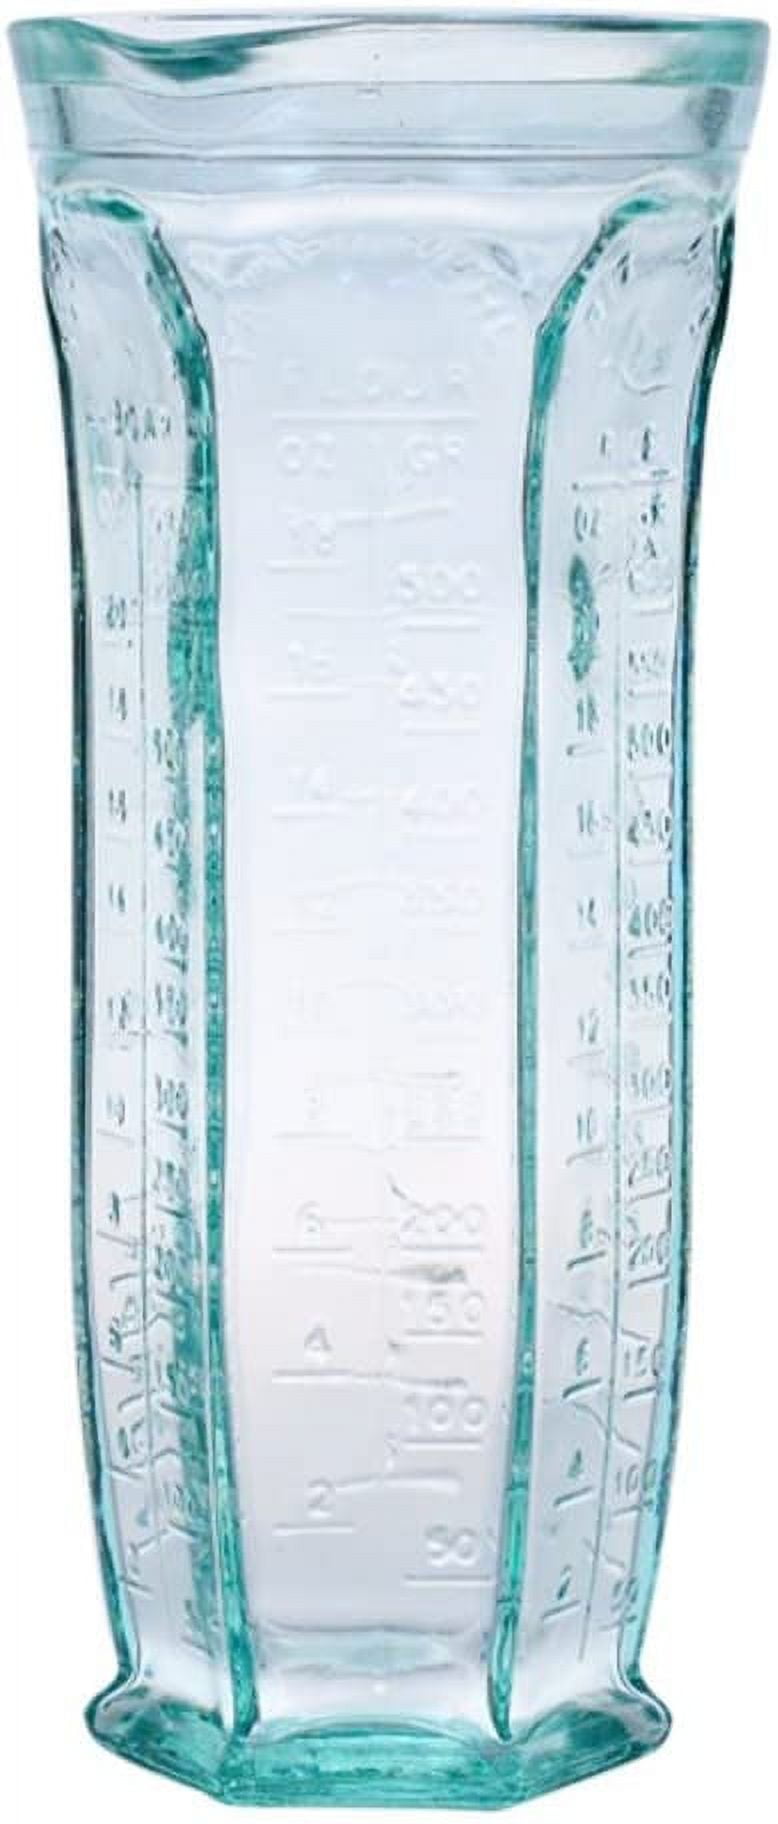  Better Houseware Measuring Cup, 12 oz, Clear: Home